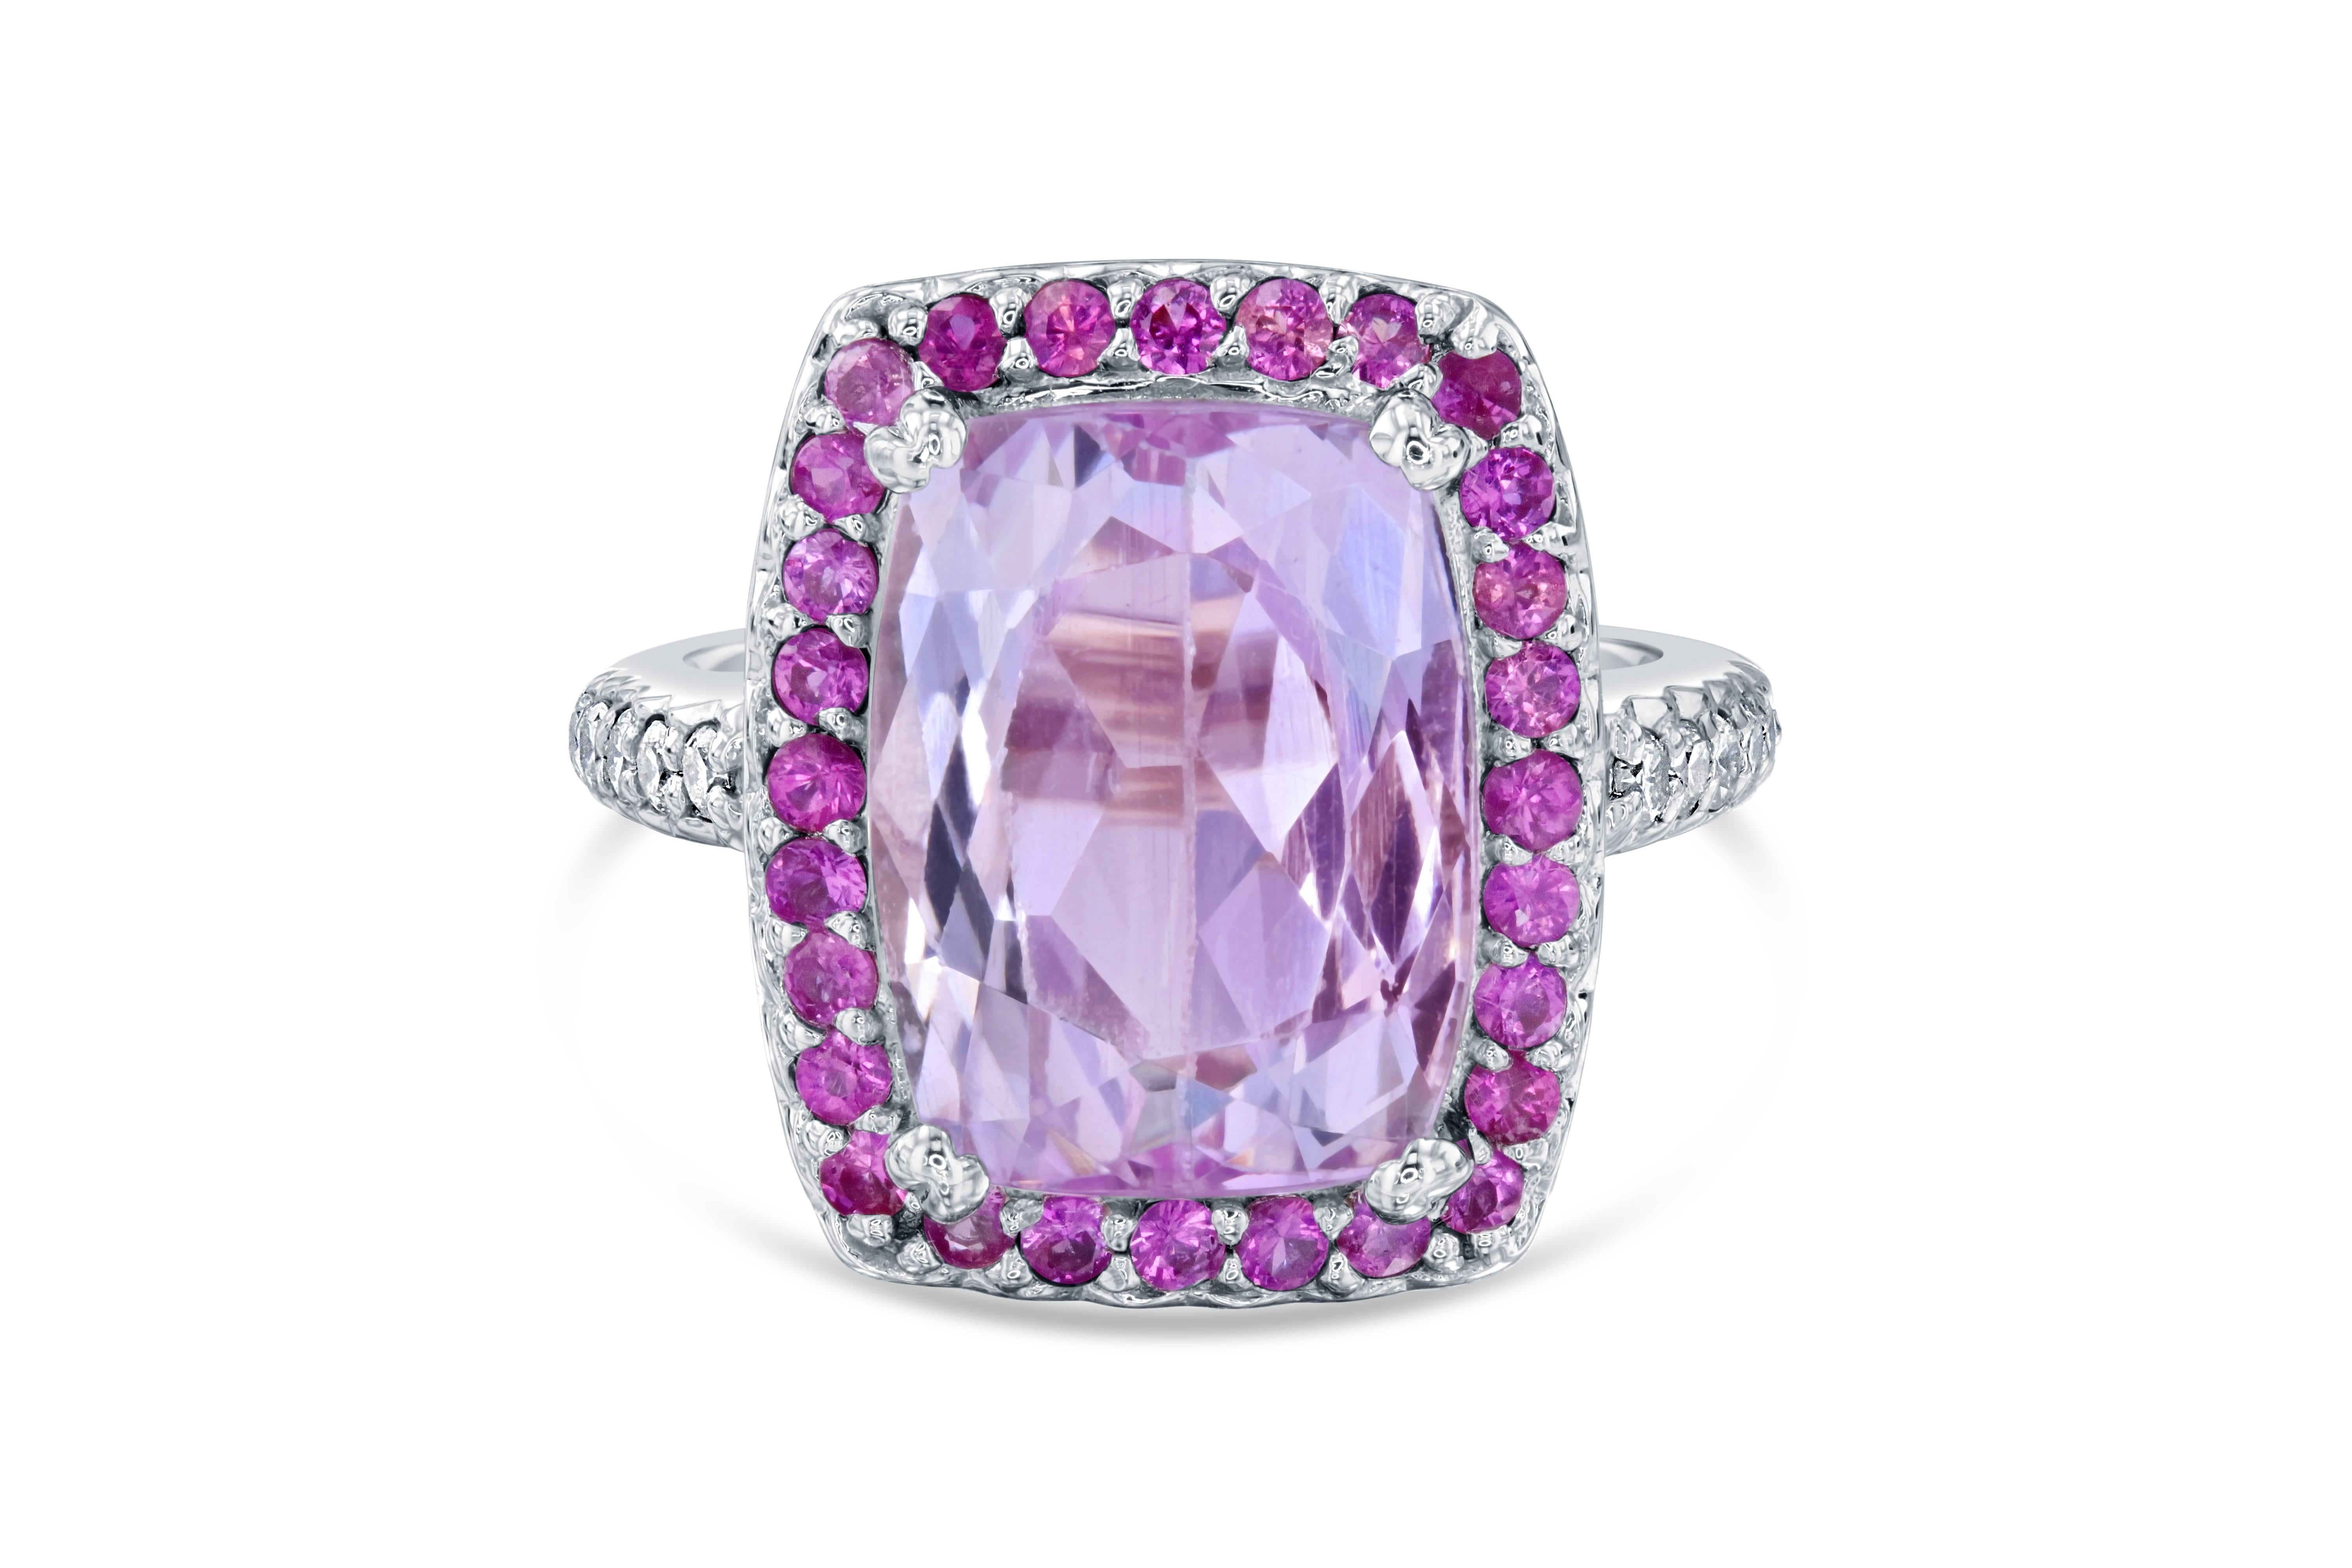 This beautiful ring has a huge 7.85 carat Kunzite that is set in the center of the ring and is surrounded by 30 Round Cut Pink Sapphires that weigh 0.80 carat.  This ring also has 10 Round Cut Diamonds that weigh 0.23 carat and are set along the